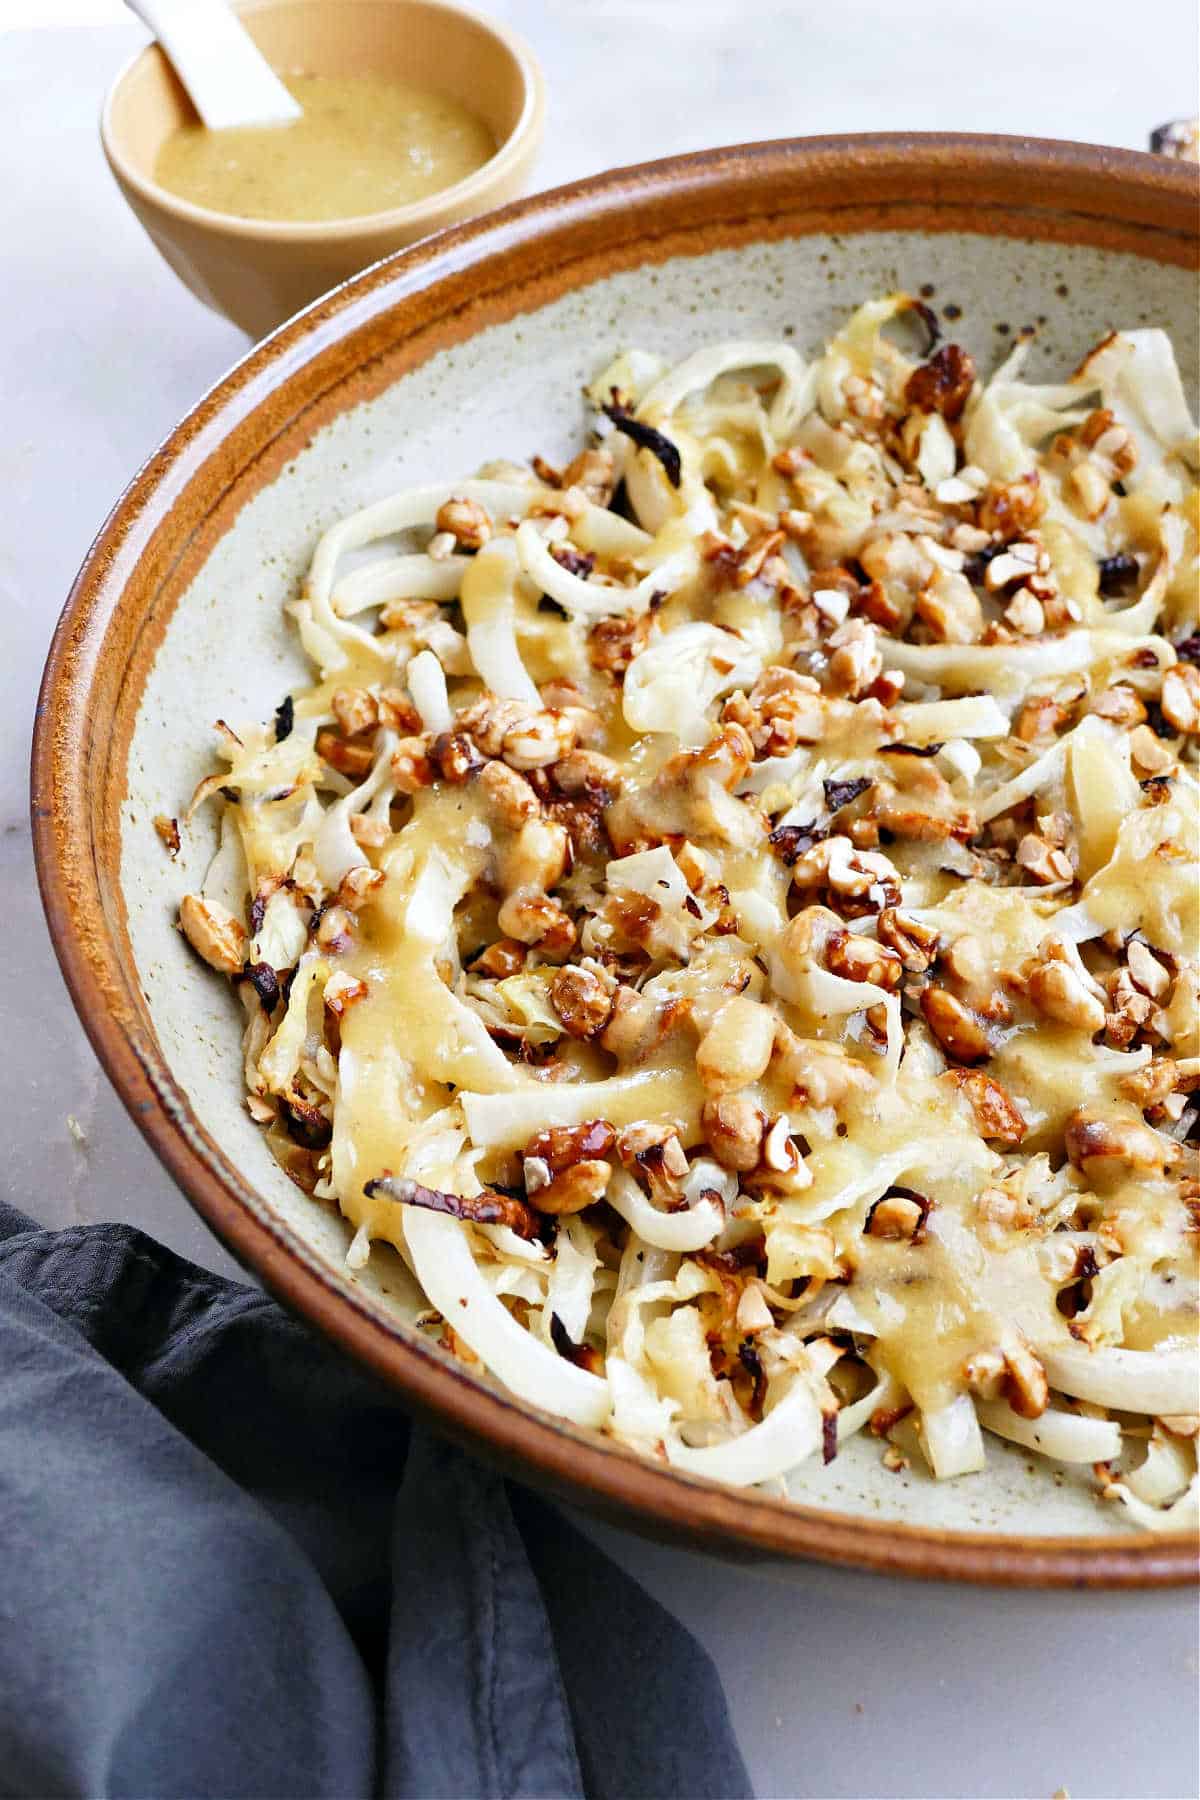 Roasted cabbage salad in a large bowl with nuts.